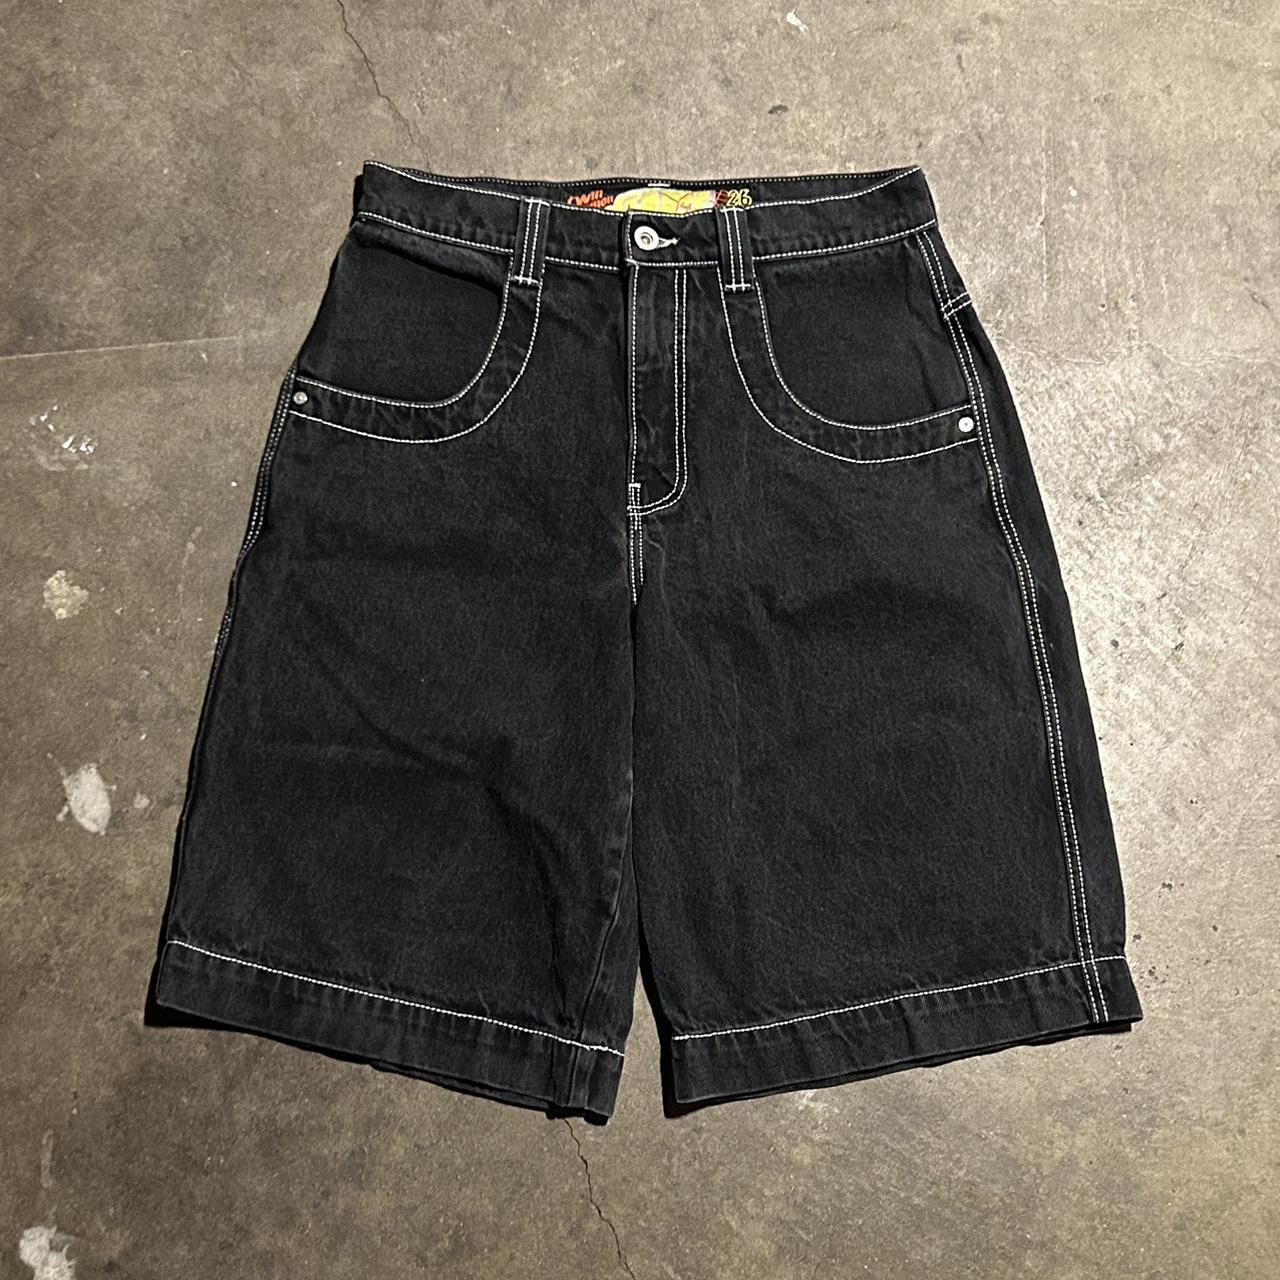 JNCO twin cannon snail embroidered jorts -... - Depop